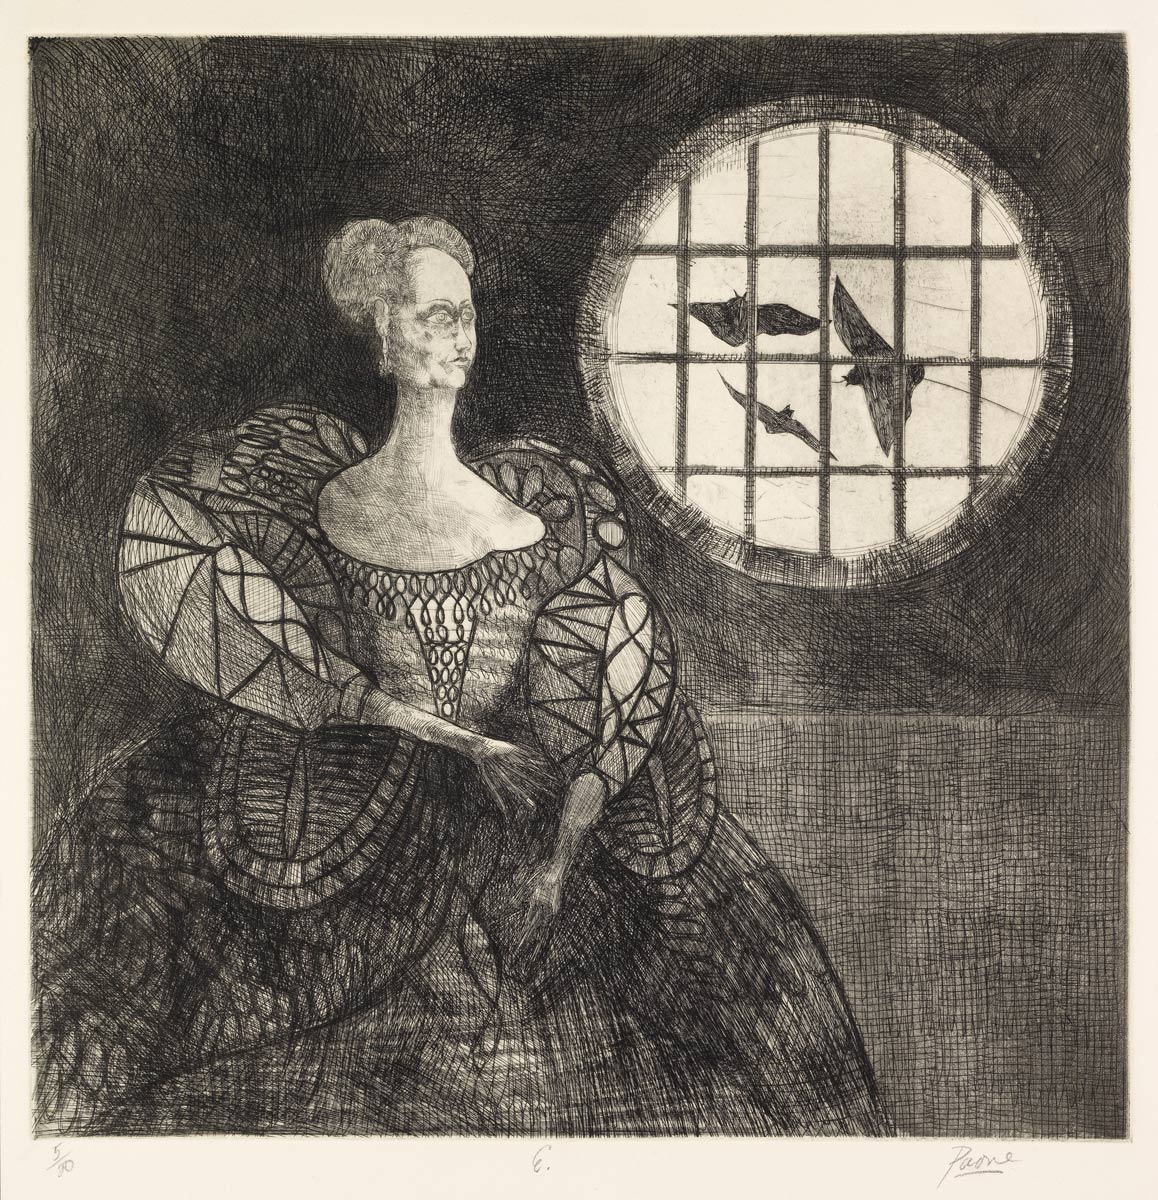 Peter Paone (b. 1936), E, 1962, etching and aquatint on paper, 18 ½ x 17 ½ in. Gift of the artist